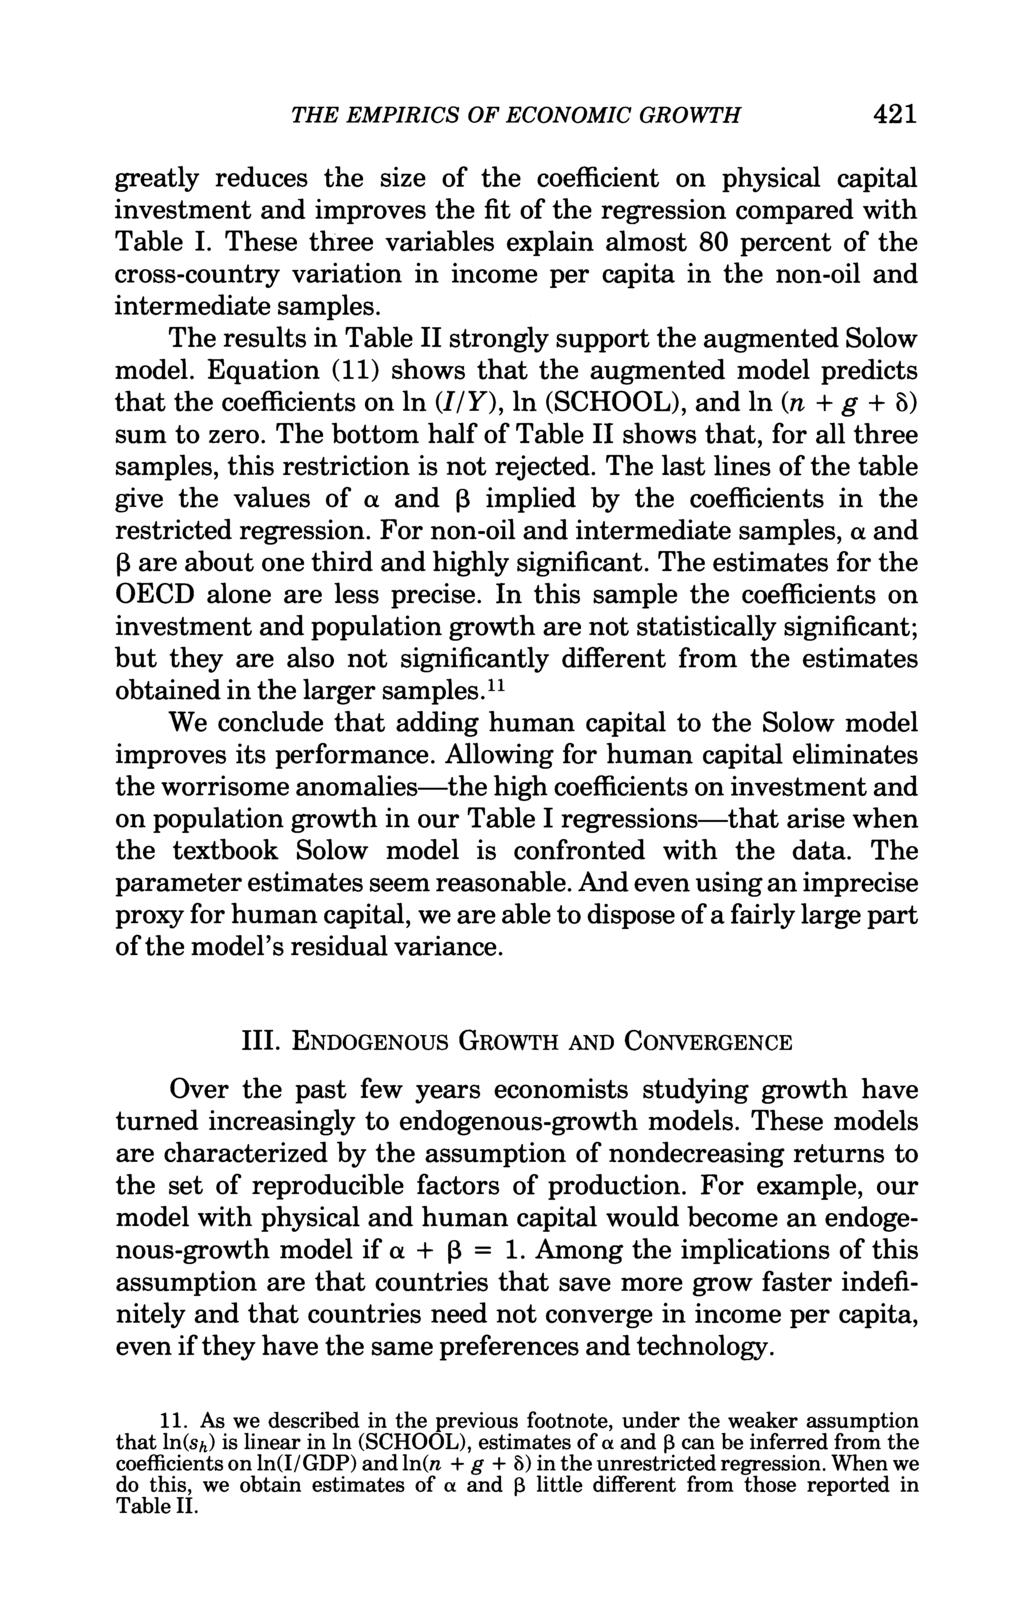 THE EMPIRICS OF ECONOMIC GROWTH 421 greatly reduces the size of the coefficient on physical capital investment and improves the fit of the regression compared with Table I.